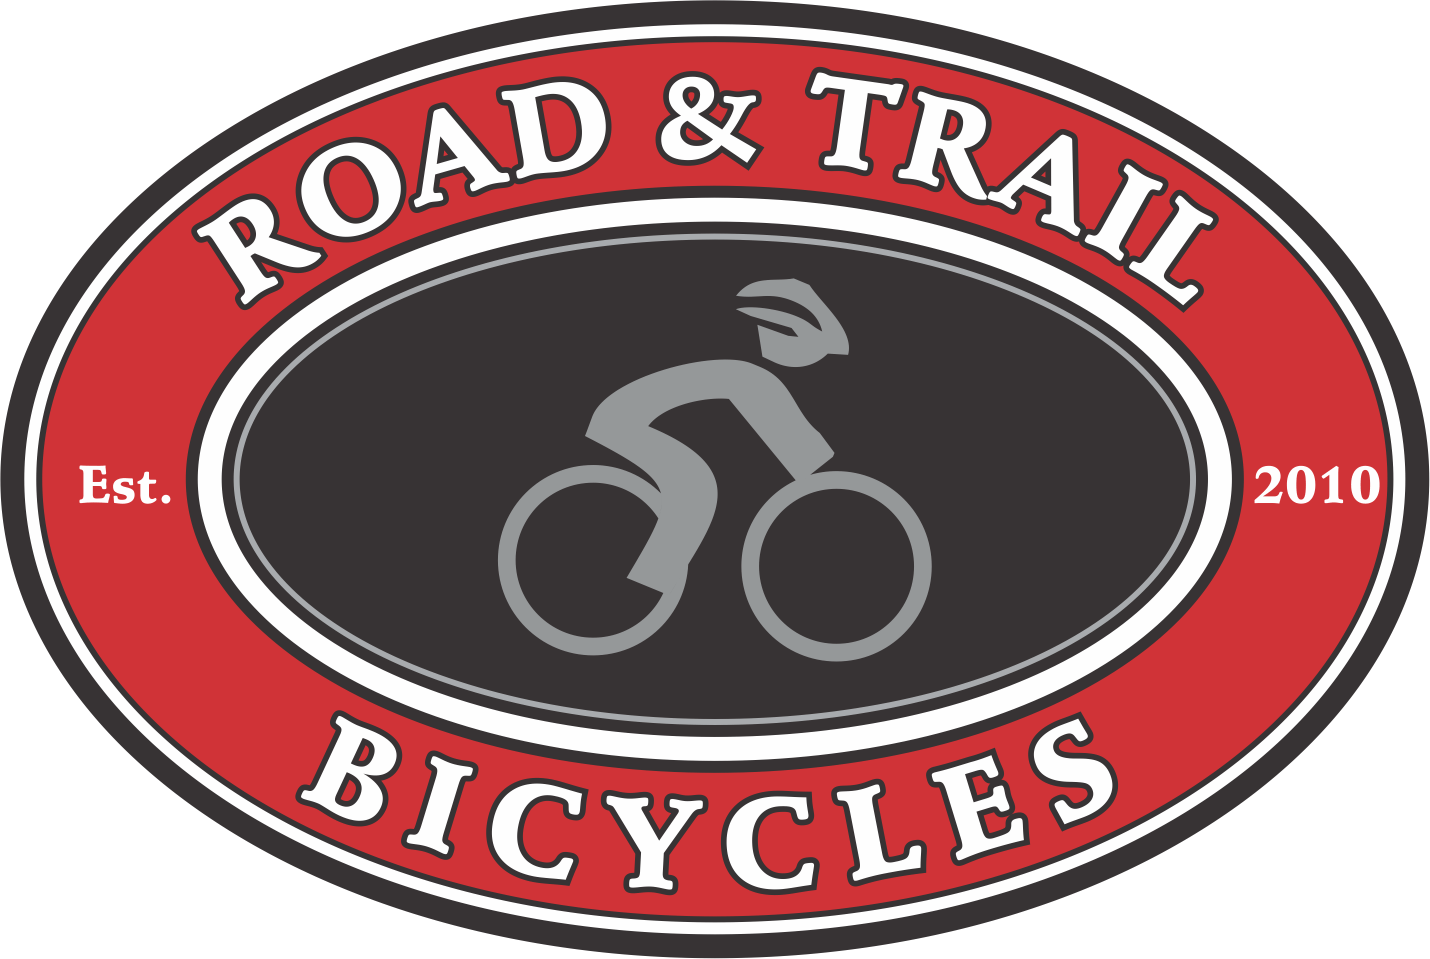 Road & Trail Bicycles